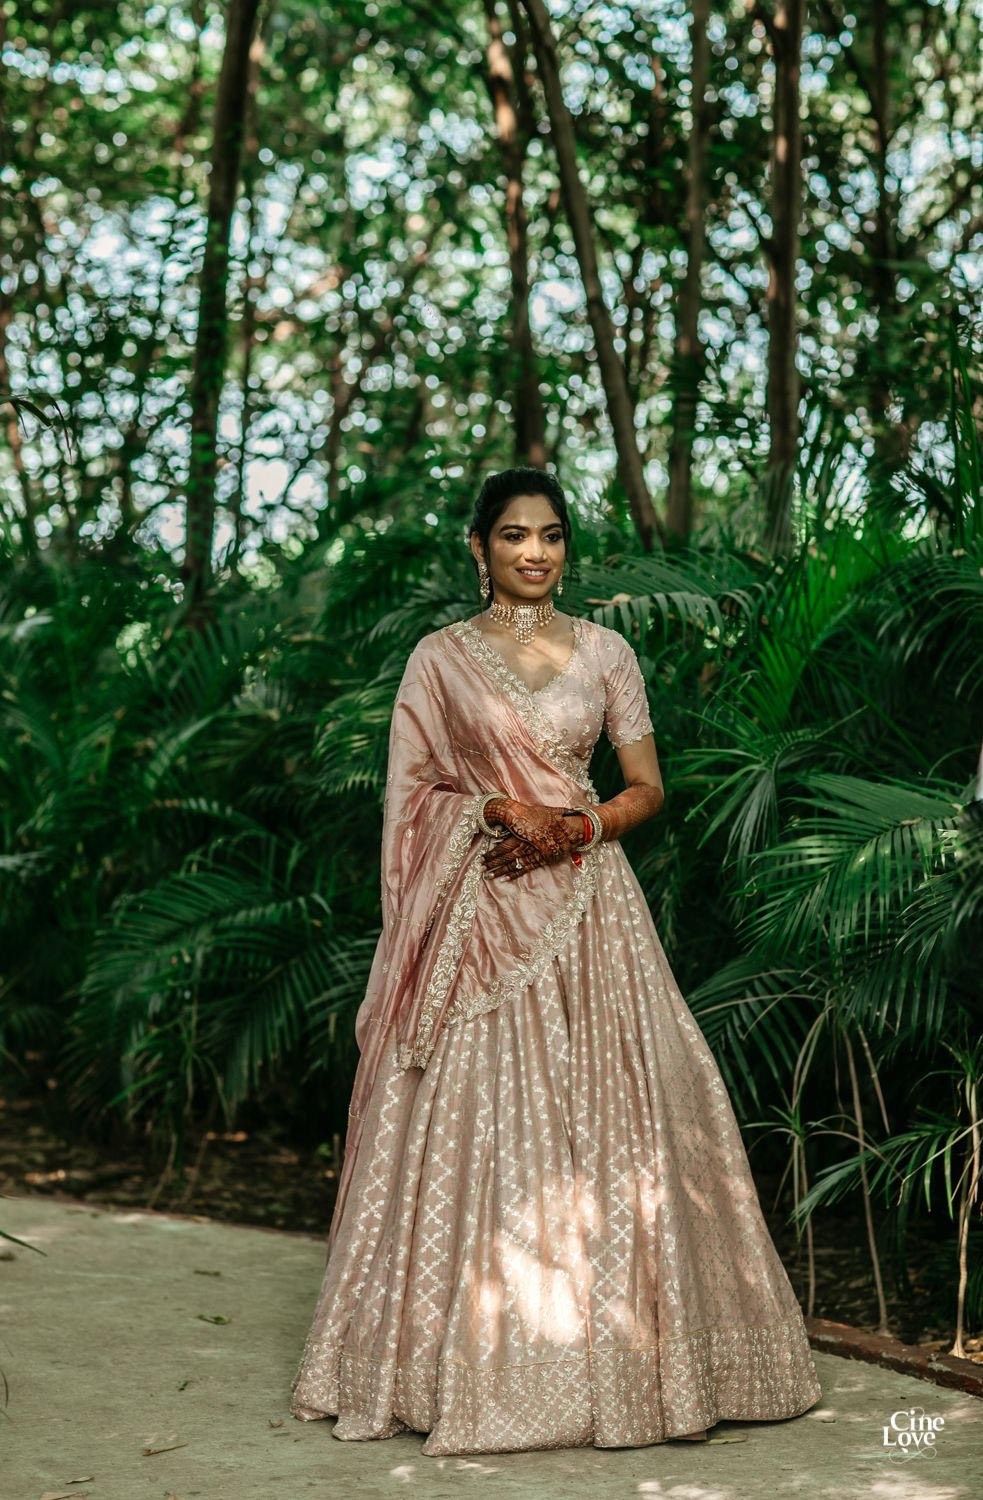 Photo of Bride wearing a blush pink lehenga for her bhaat ceremony